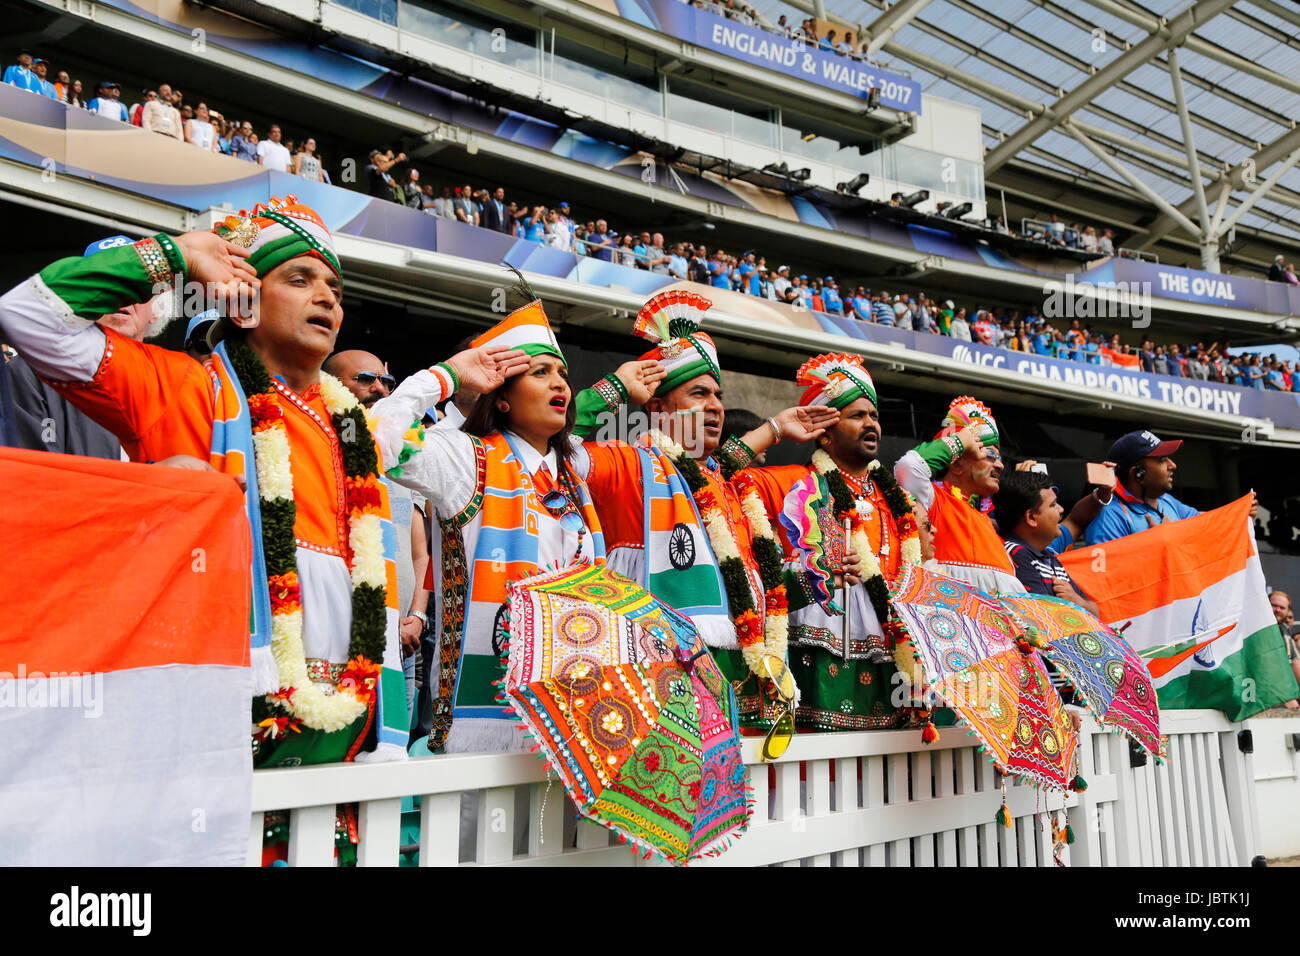 Indian supporters and fans seen during the ICC Champions Trophy 2017 match between India and South Africa at The Oval in London. Photo by James Boardman/Telephoto Images Stock Photo